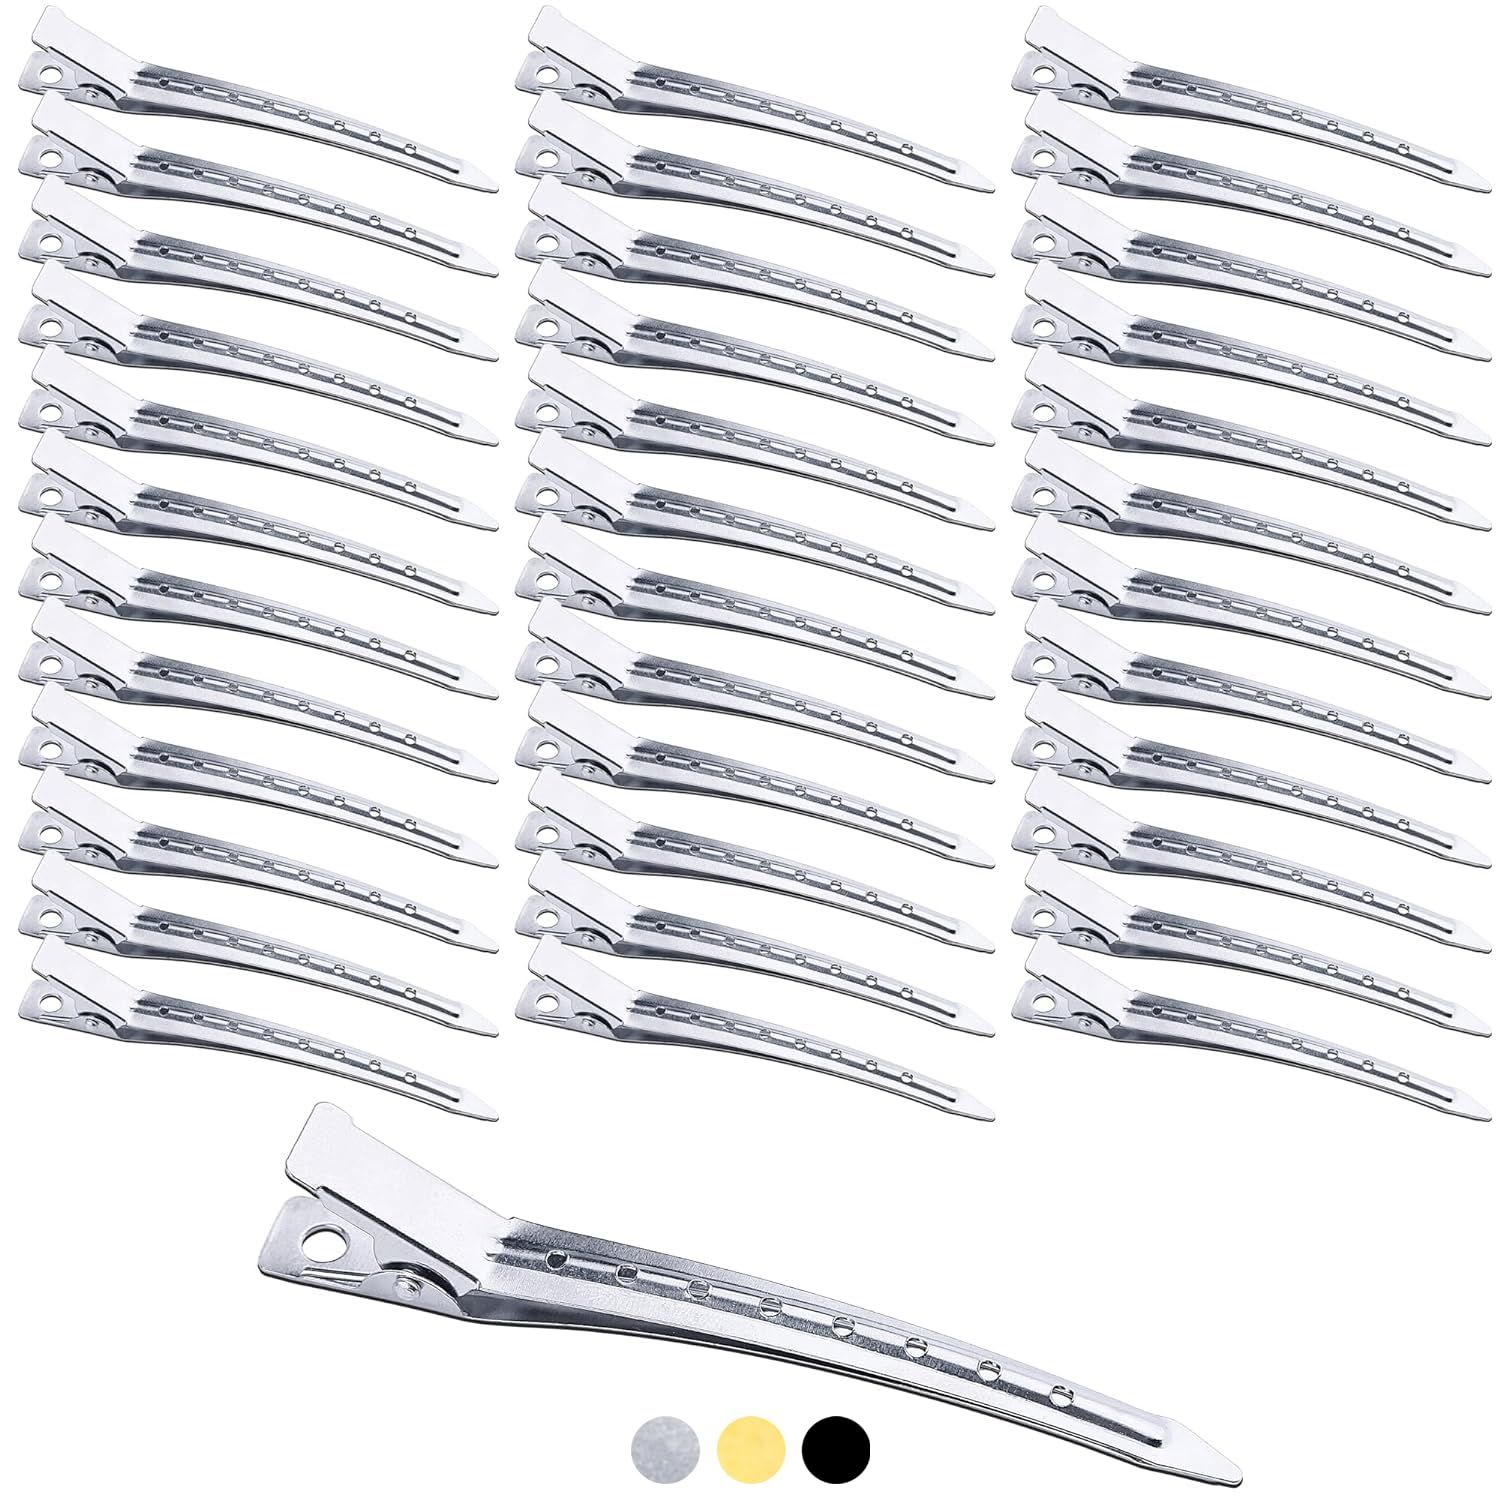 Mbsomnus 36pcs Hair Clips for Styling 3.5 Inch Silver Sectioning Hair Clips Metal Pin Curl Clips ... | Amazon (UK)